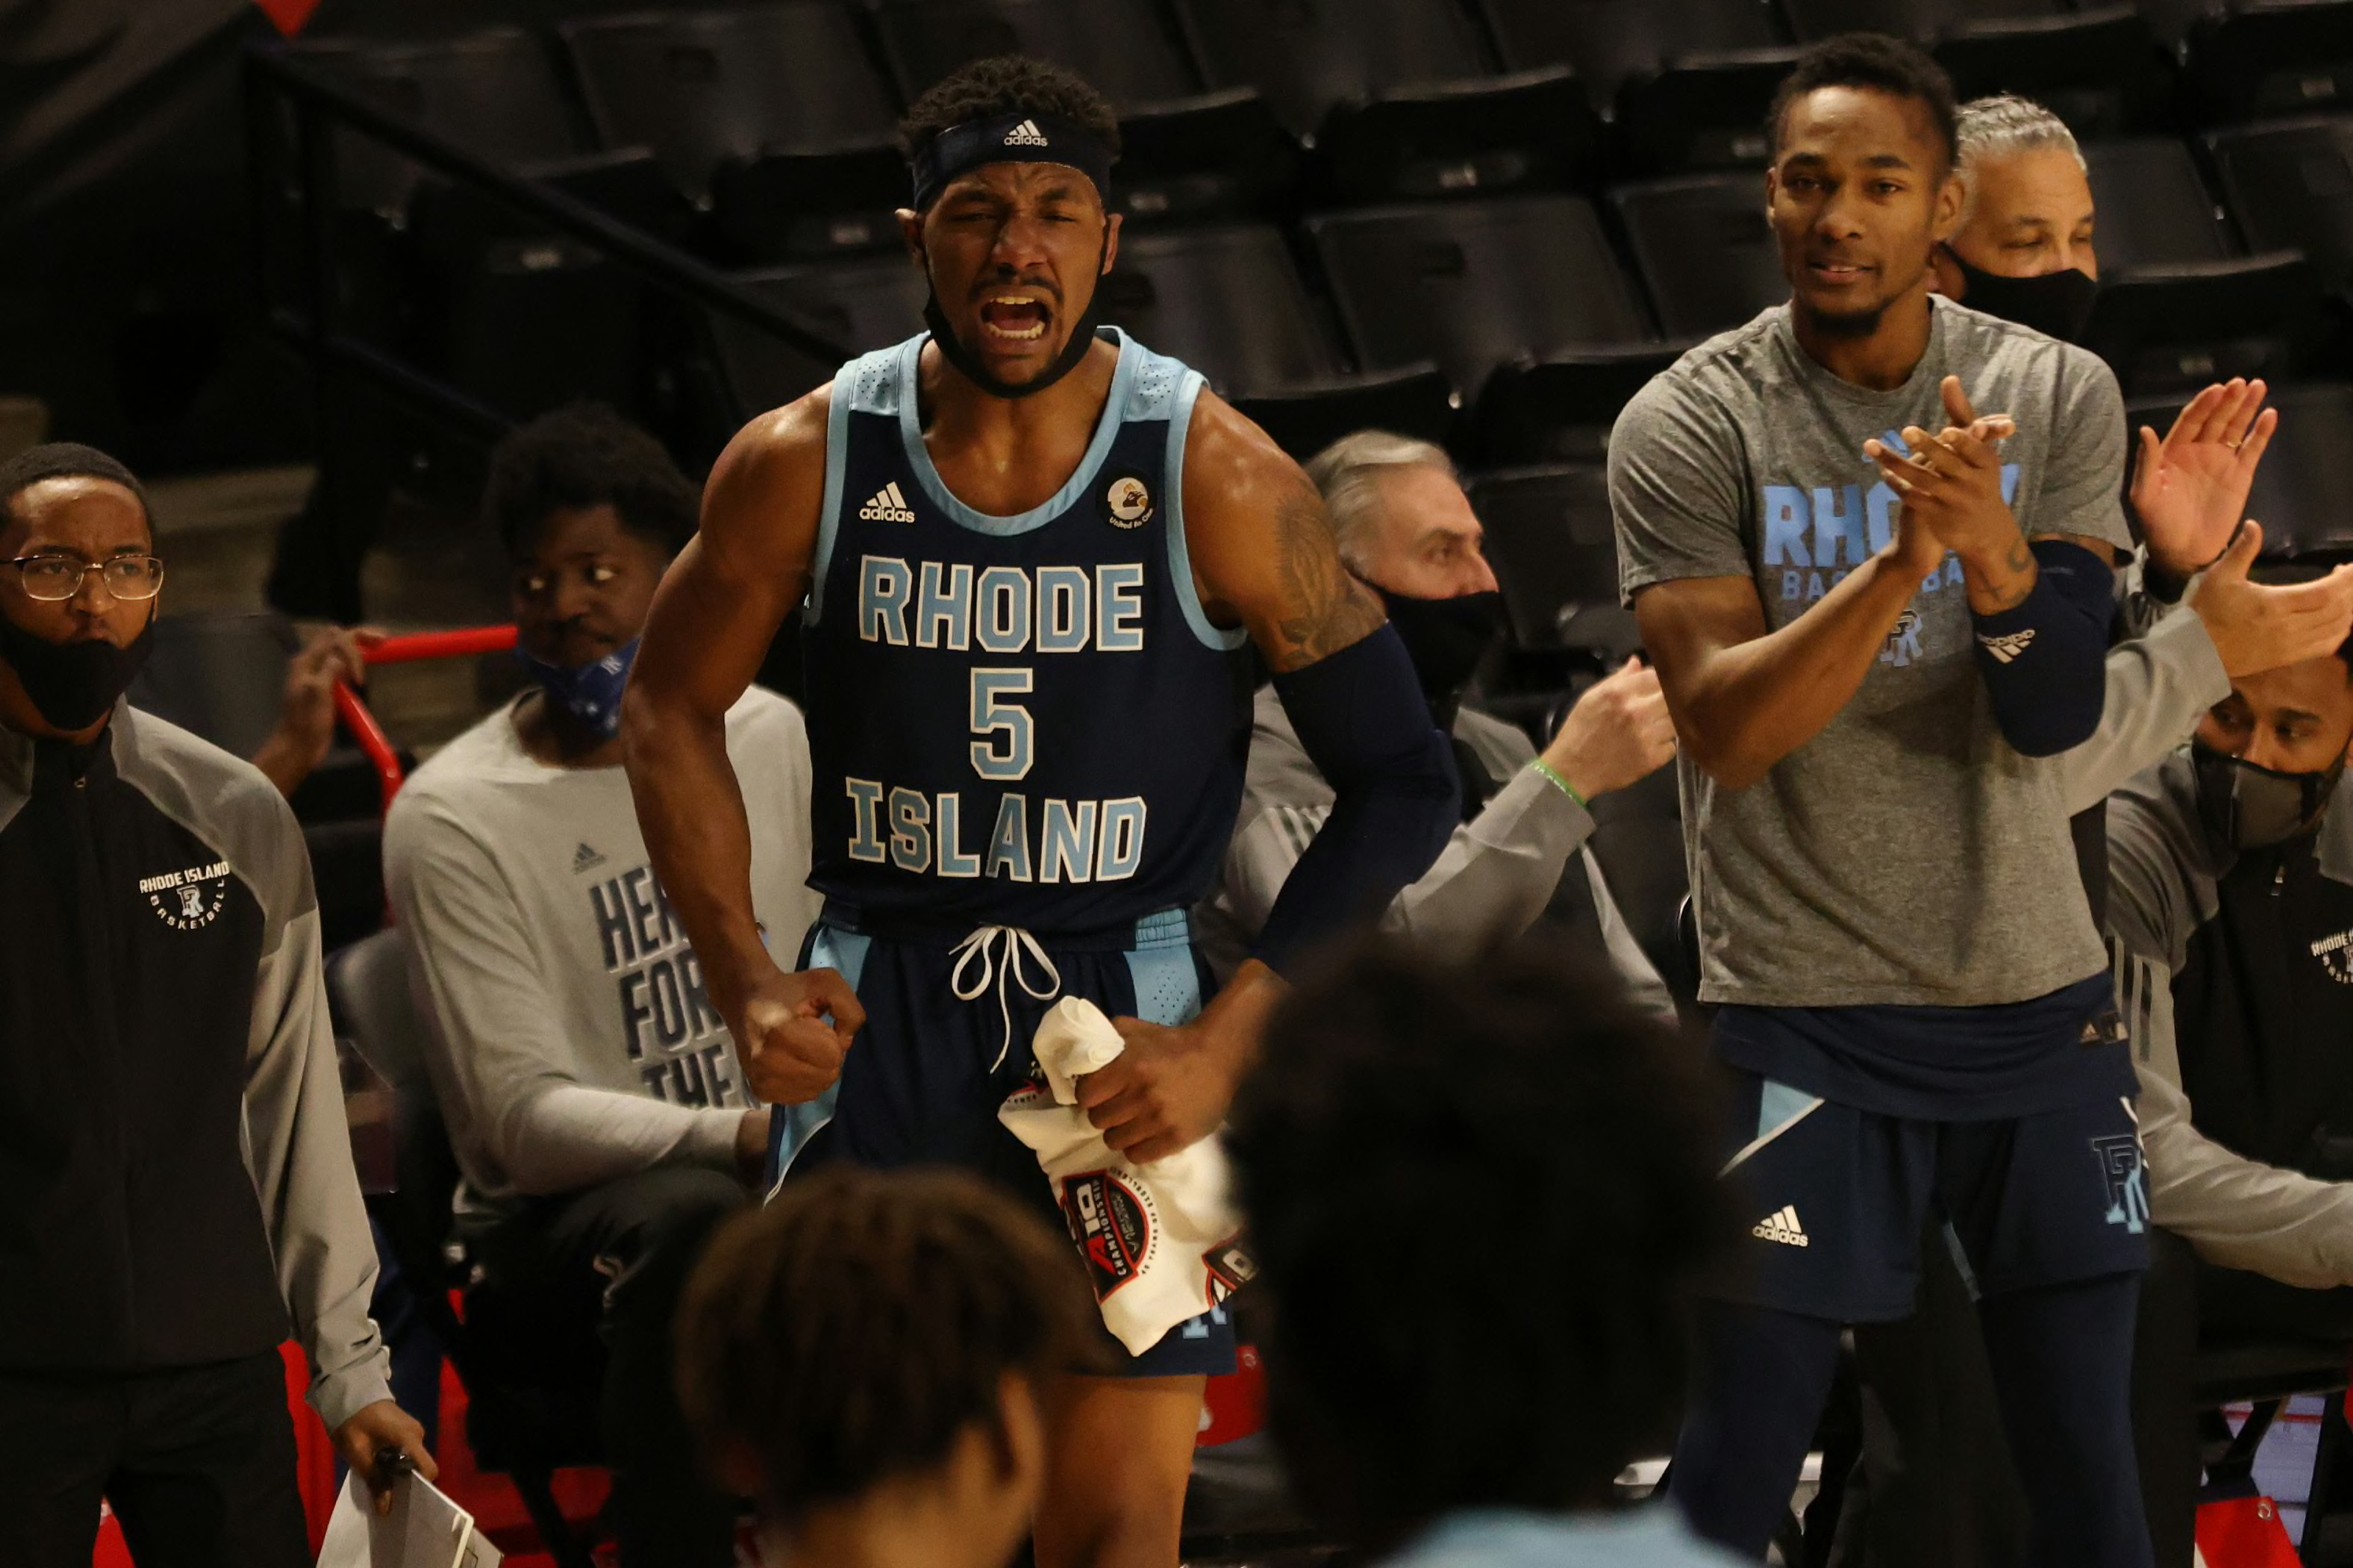 Rhode Island Basketball: Projected lineup and depth chart for 2021-22